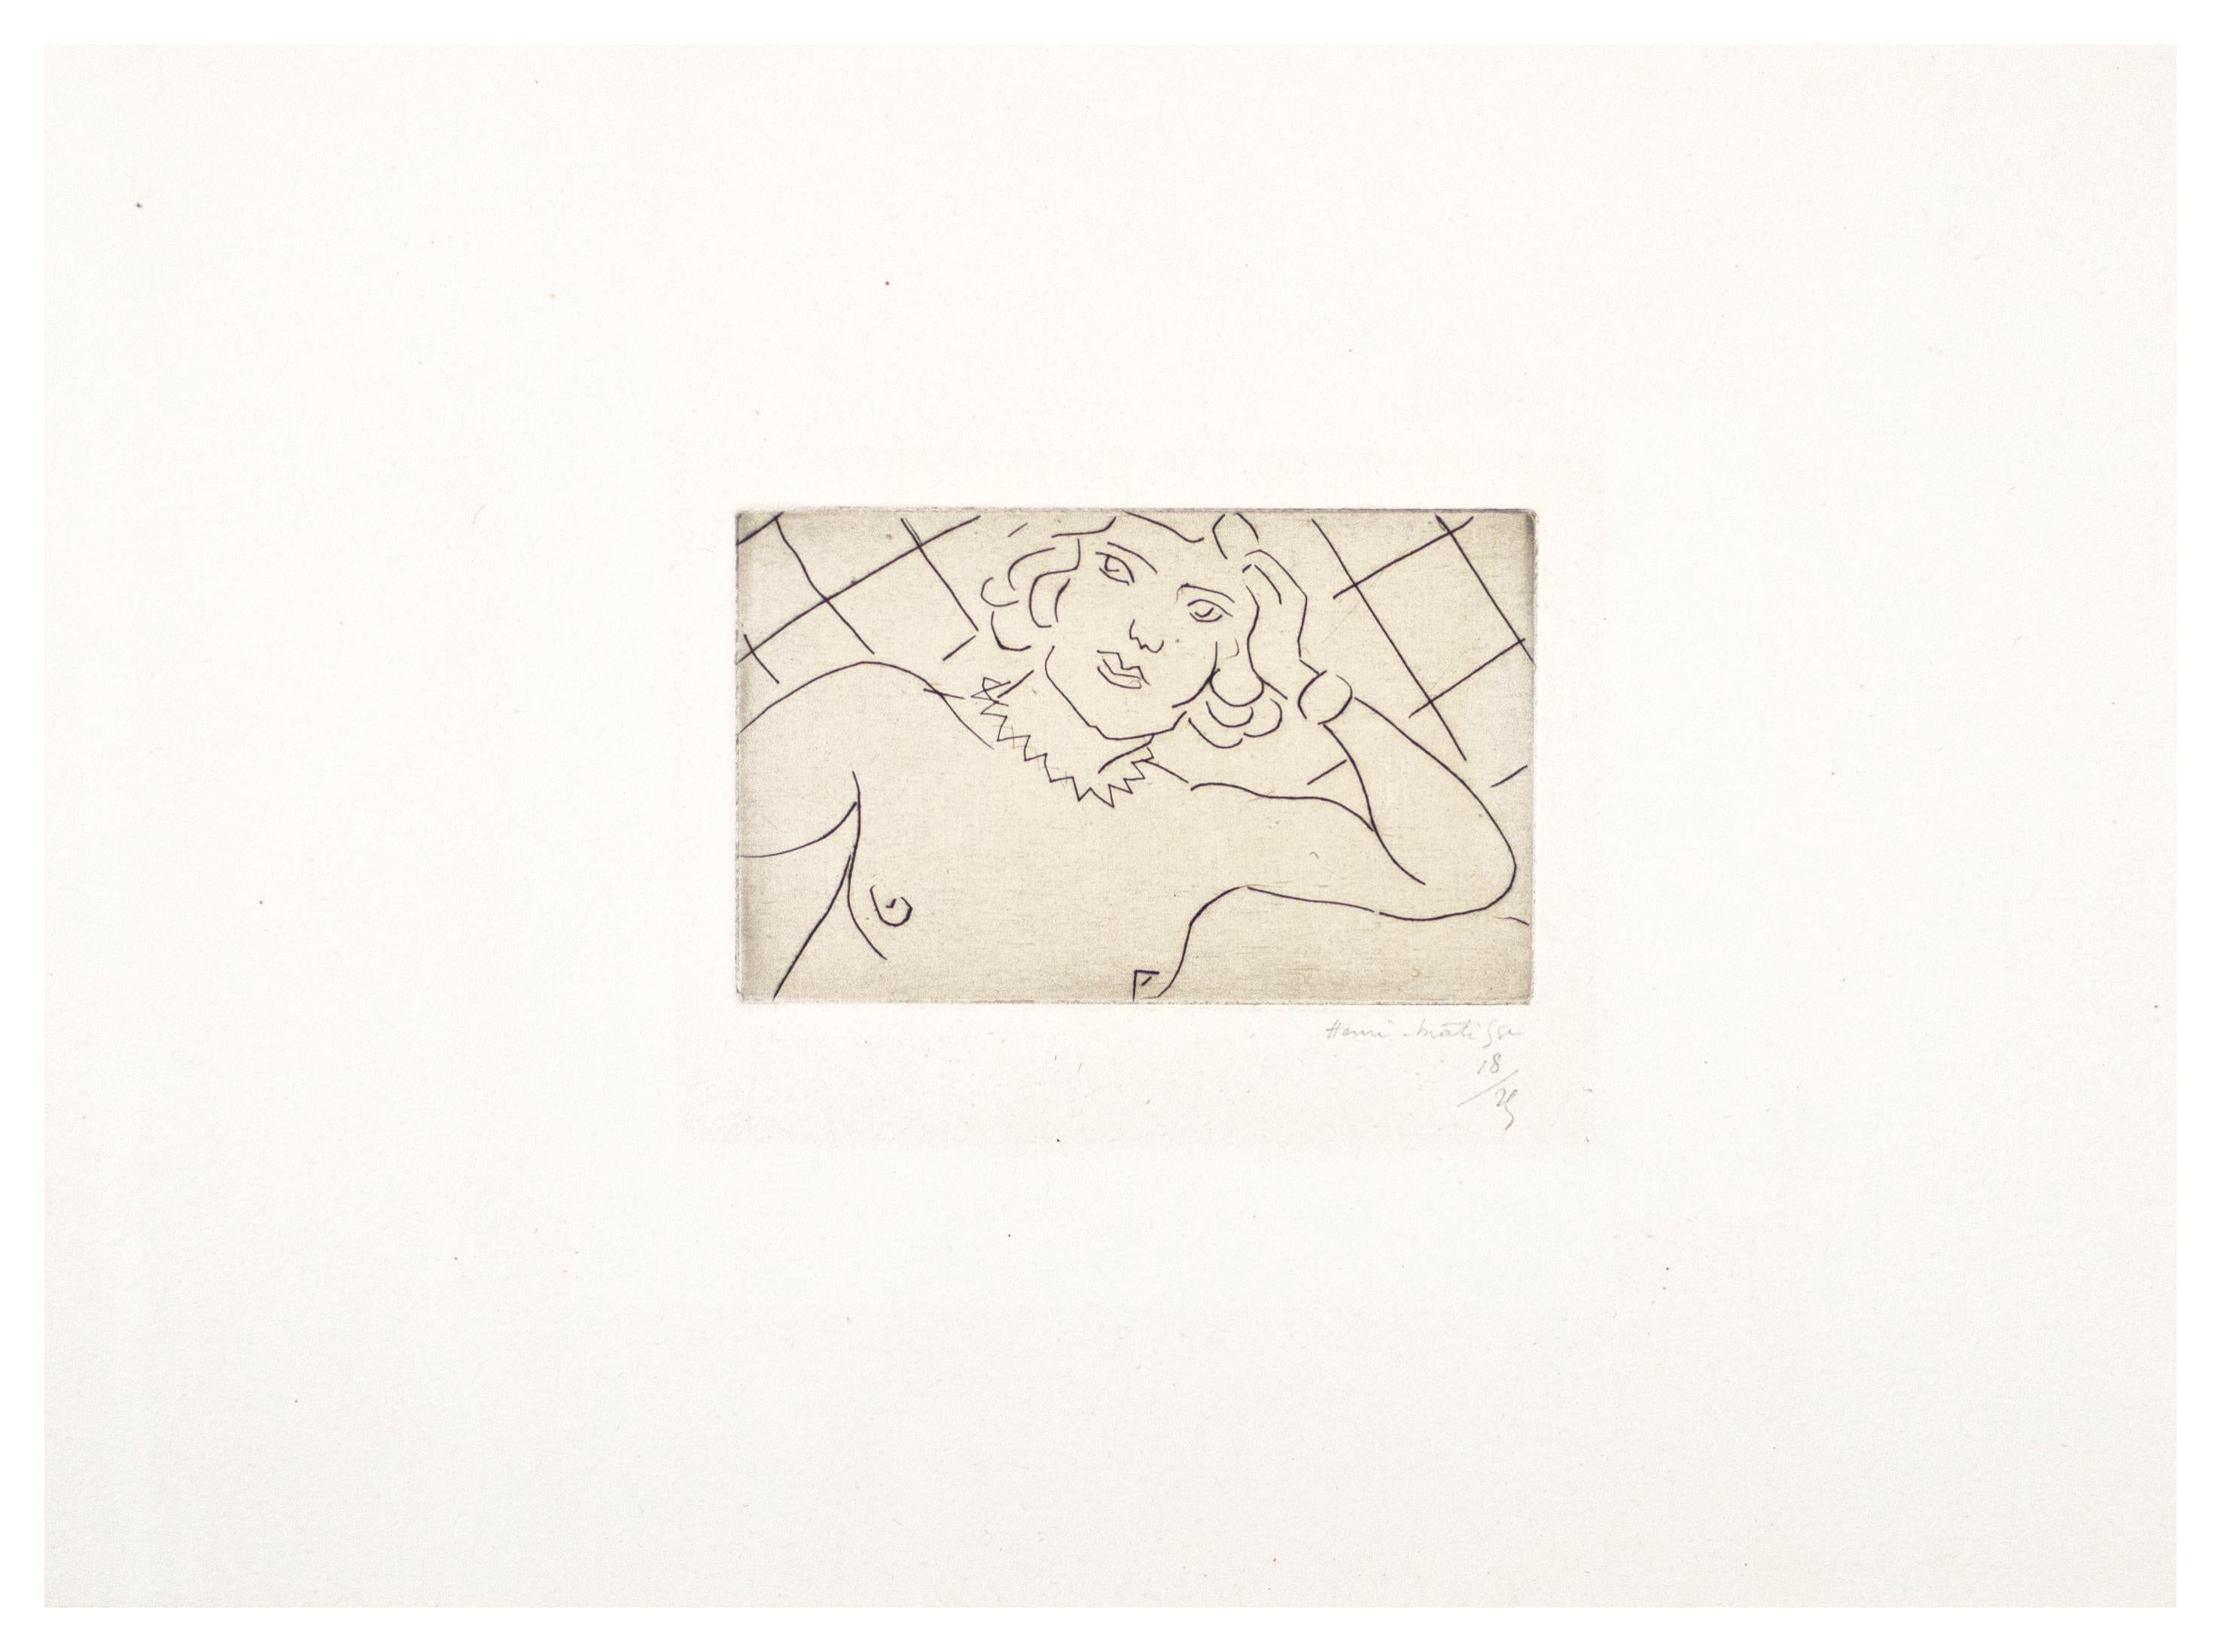 Torse, Fond à Losanges - Drypoint on China by H. Matisse, 1929 - Print by Henri Matisse